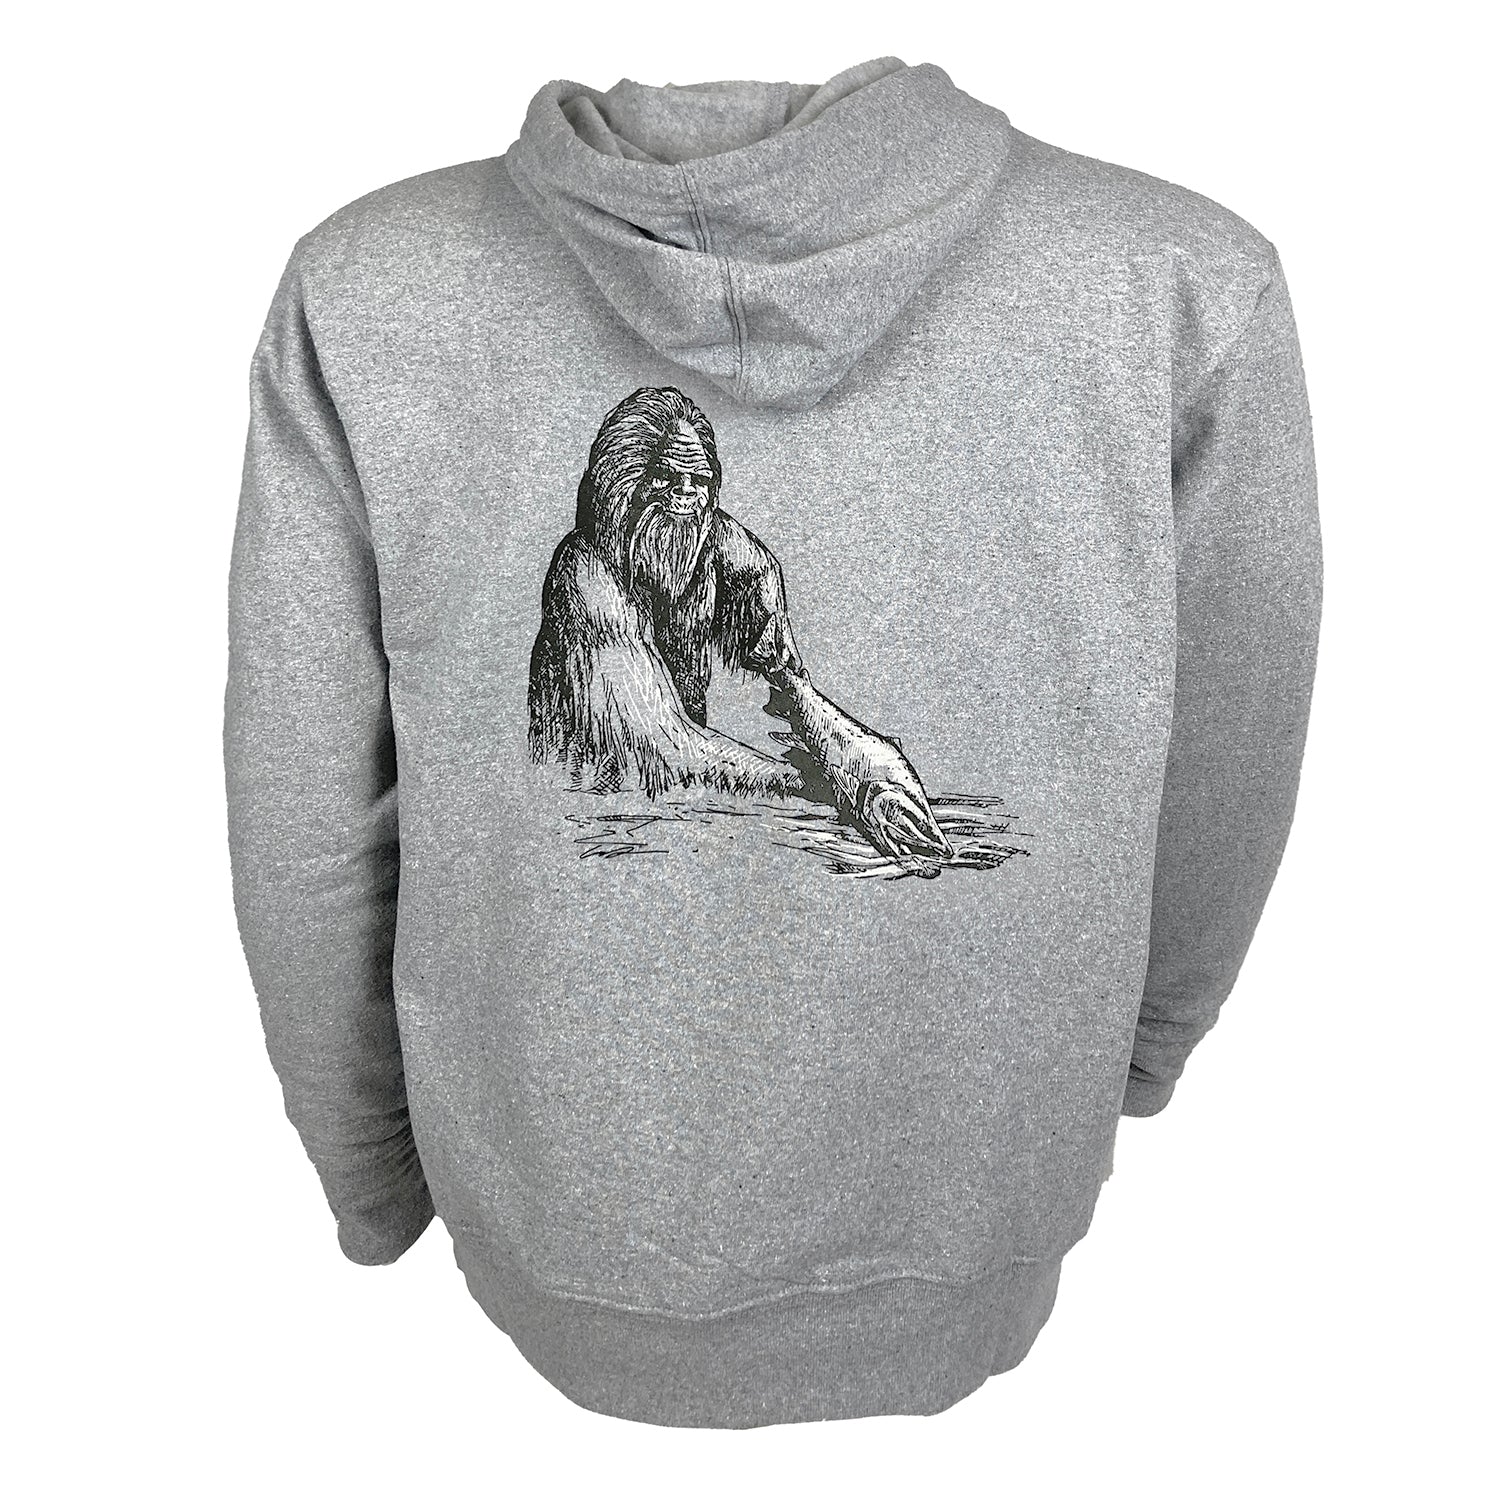 A grey hoody with artwork showing sasquatch holding a fish on the backl